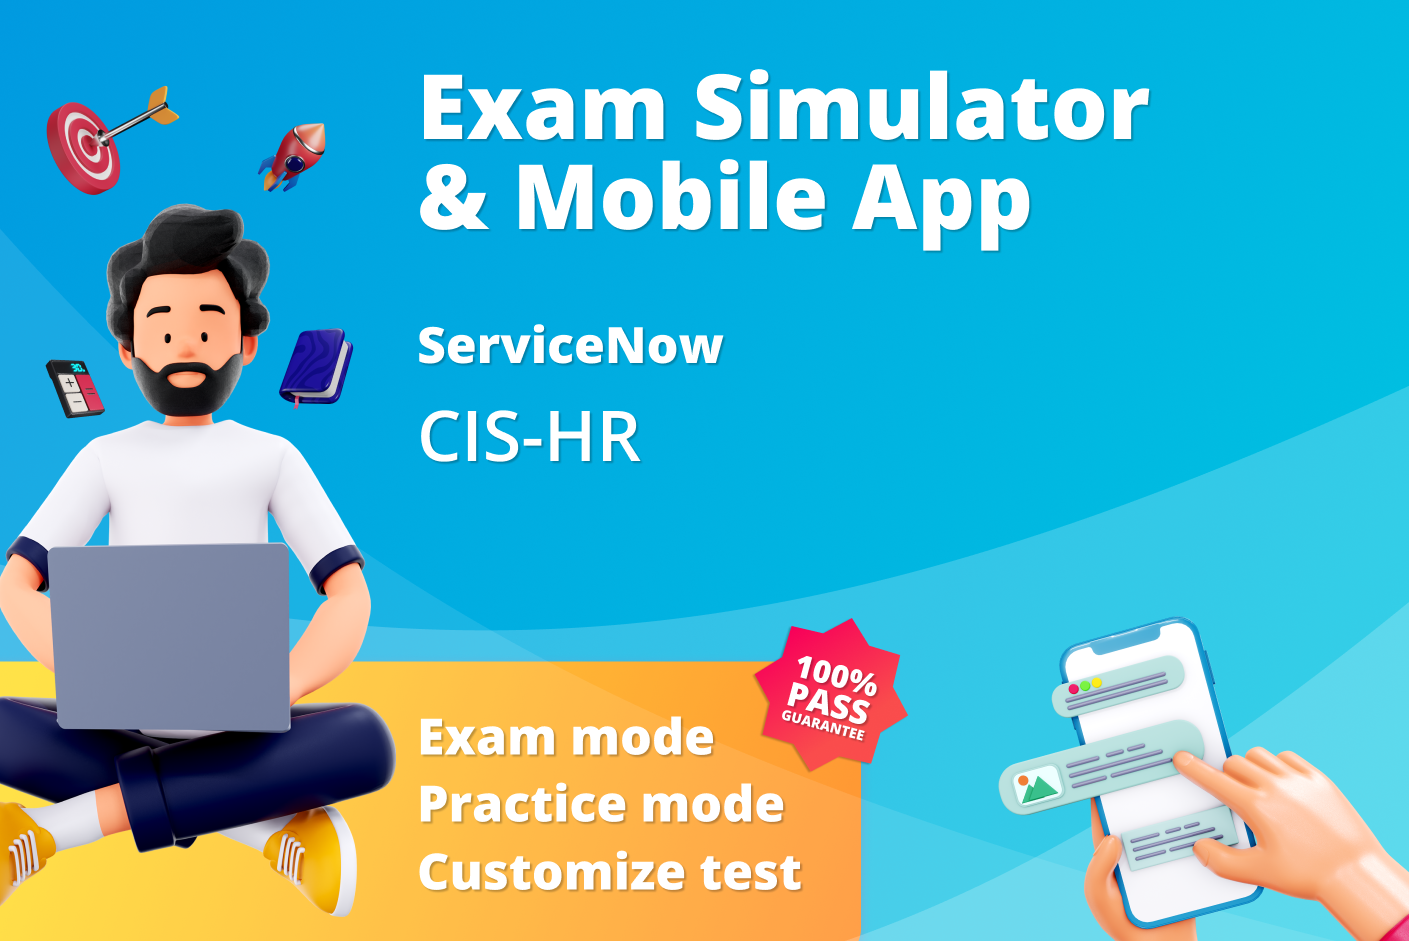 CIS-HR mock exam: Prepare and ace your CIS-HR mock exam with practice tests and study guides